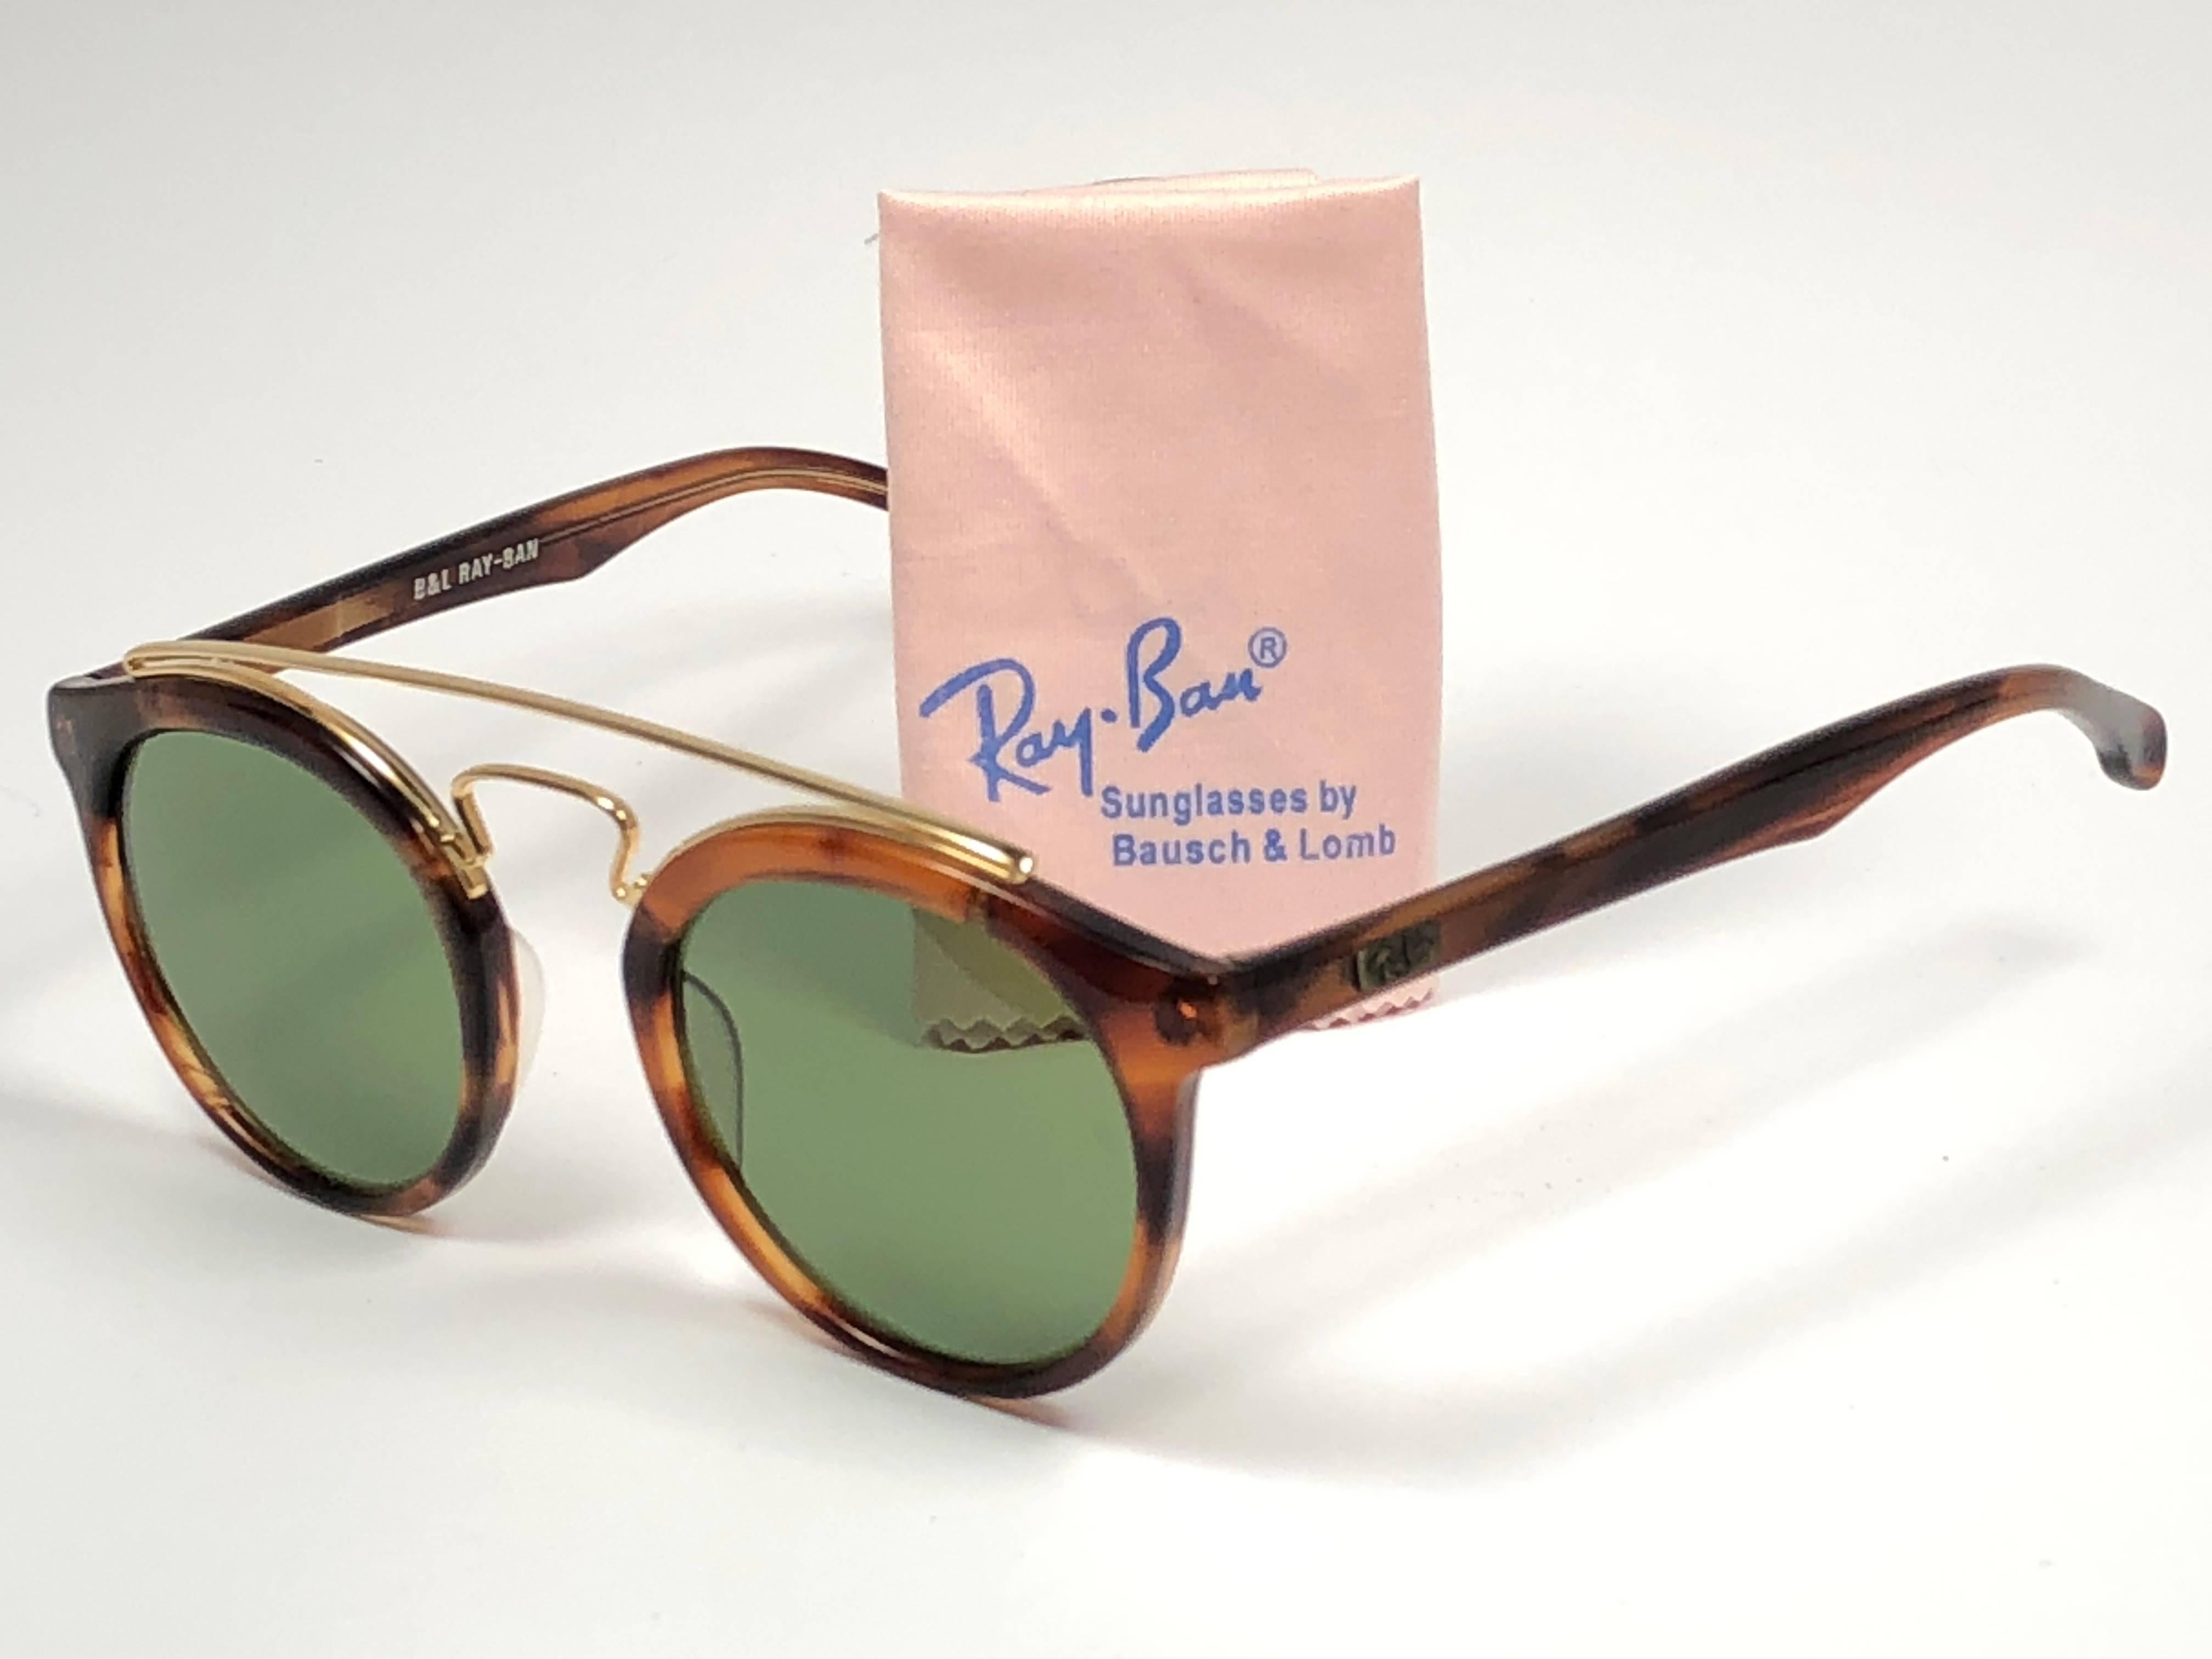 New Vintage Ray Ban Oval Gold Gatsby frame with RB3 Green Lenses without Ray Ban logo. Comes with its original Ray Ban B&L case.  
This piece may show minor sign of wear due to storage.  
A seldom piece in new, never worn or displayed condition.